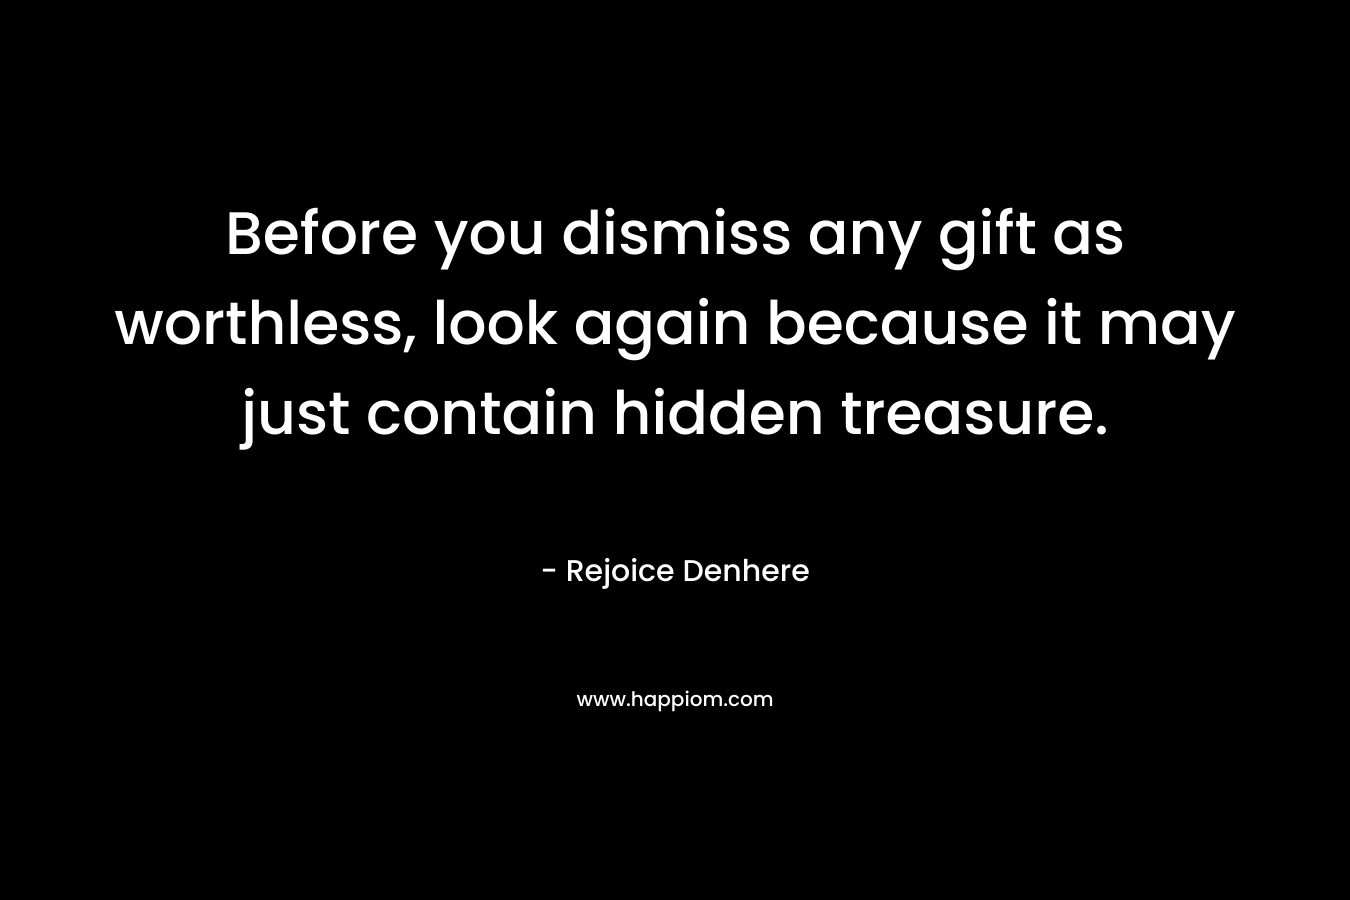 Before you dismiss any gift as worthless, look again because it may just contain hidden treasure. – Rejoice Denhere